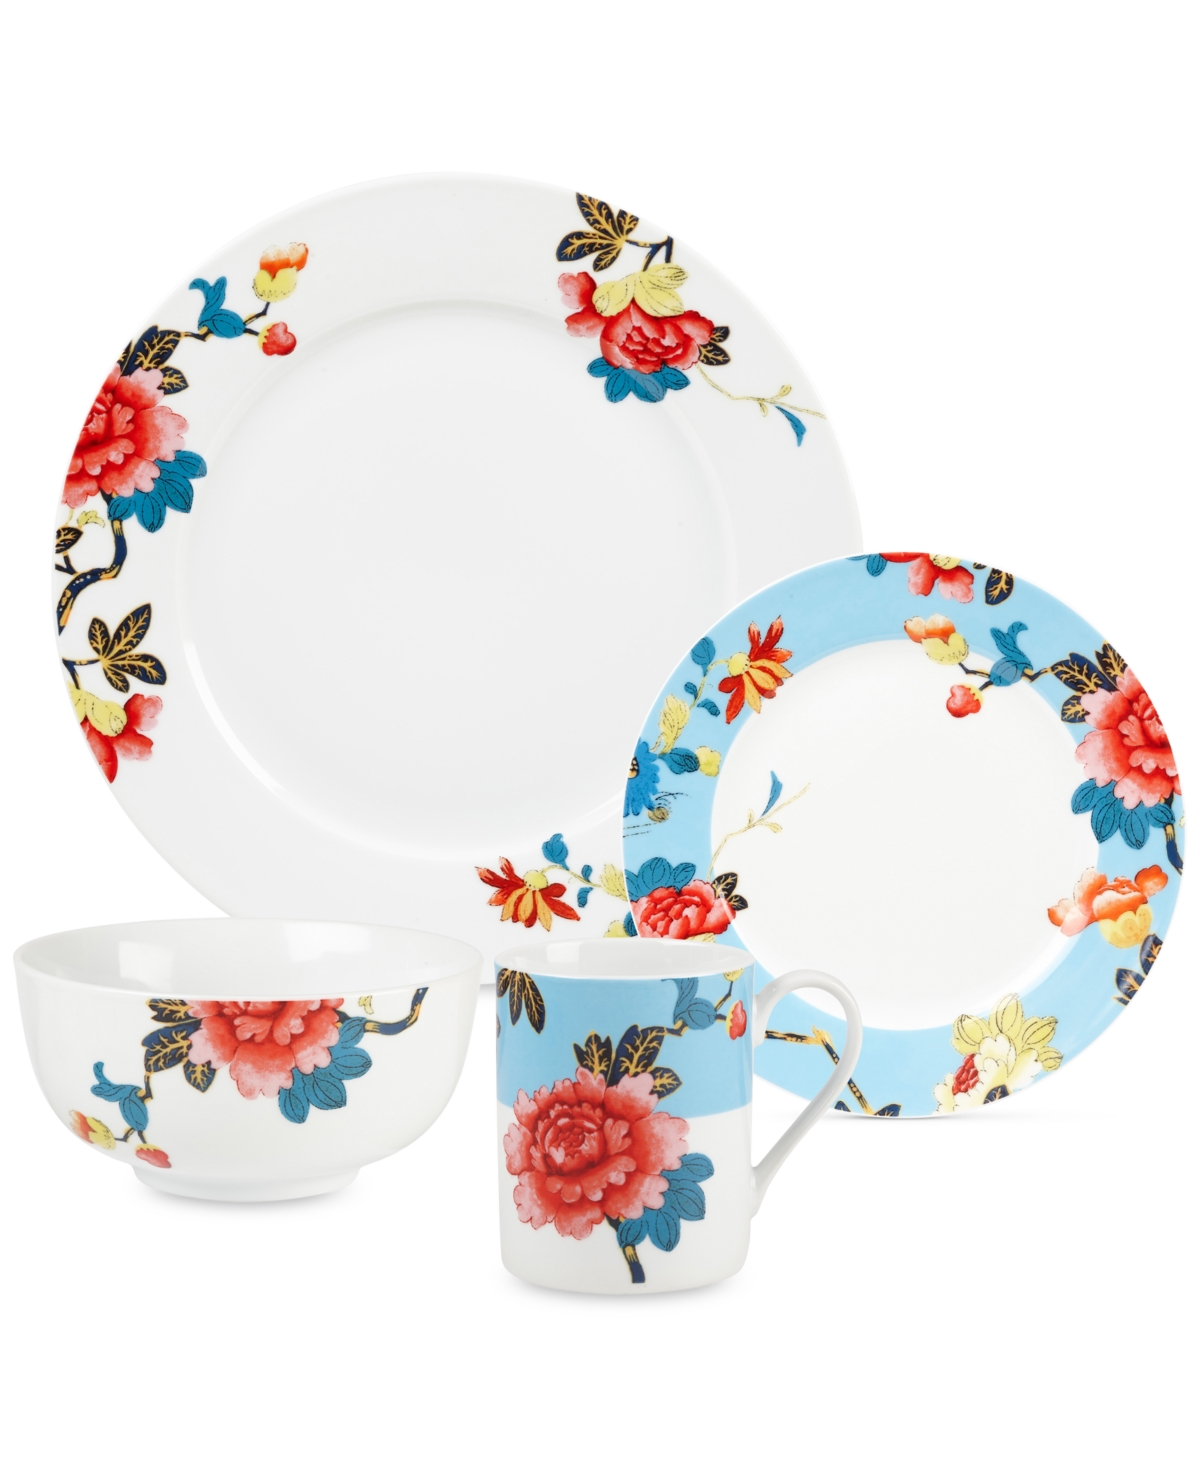 Isabella 16-Pc. Dinnerware Set, Exclusively Available at Macy's, Service for 4 - White